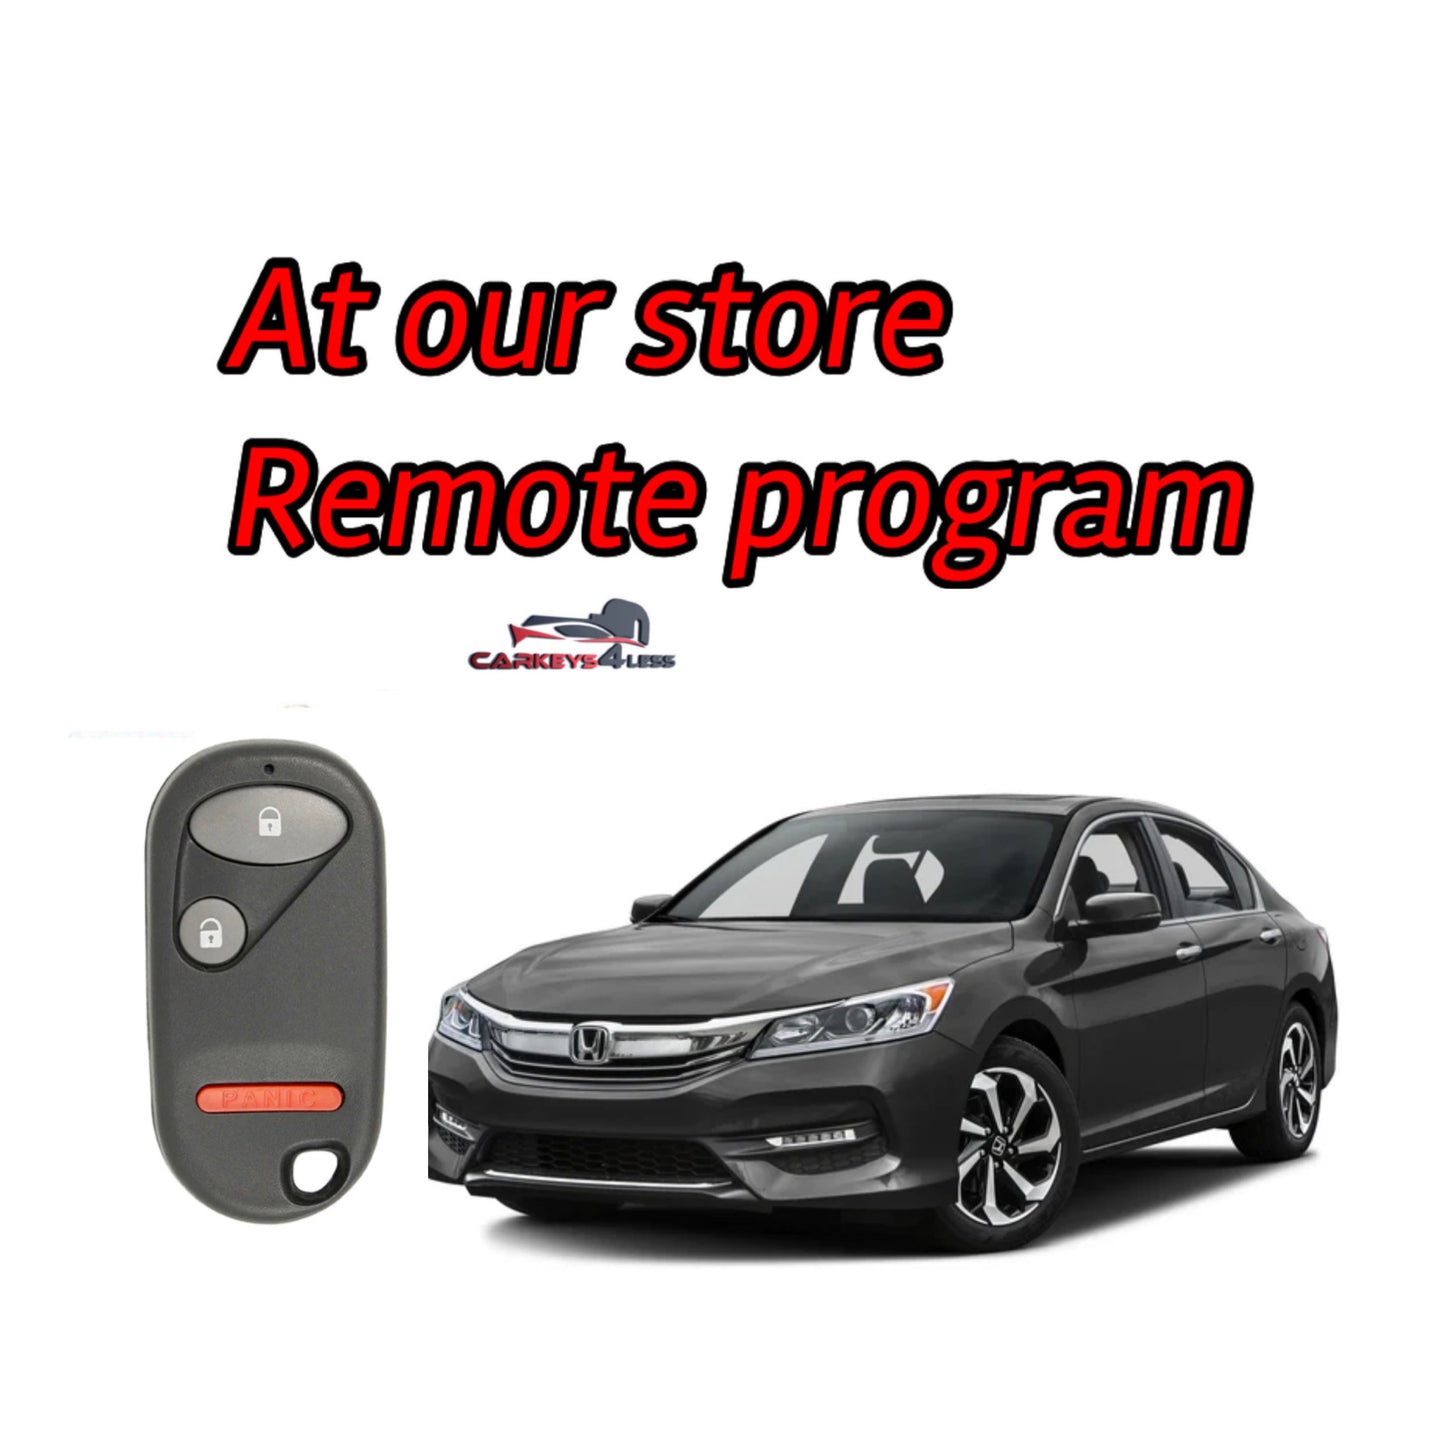 At our store an aftermarket honda remote replacement program